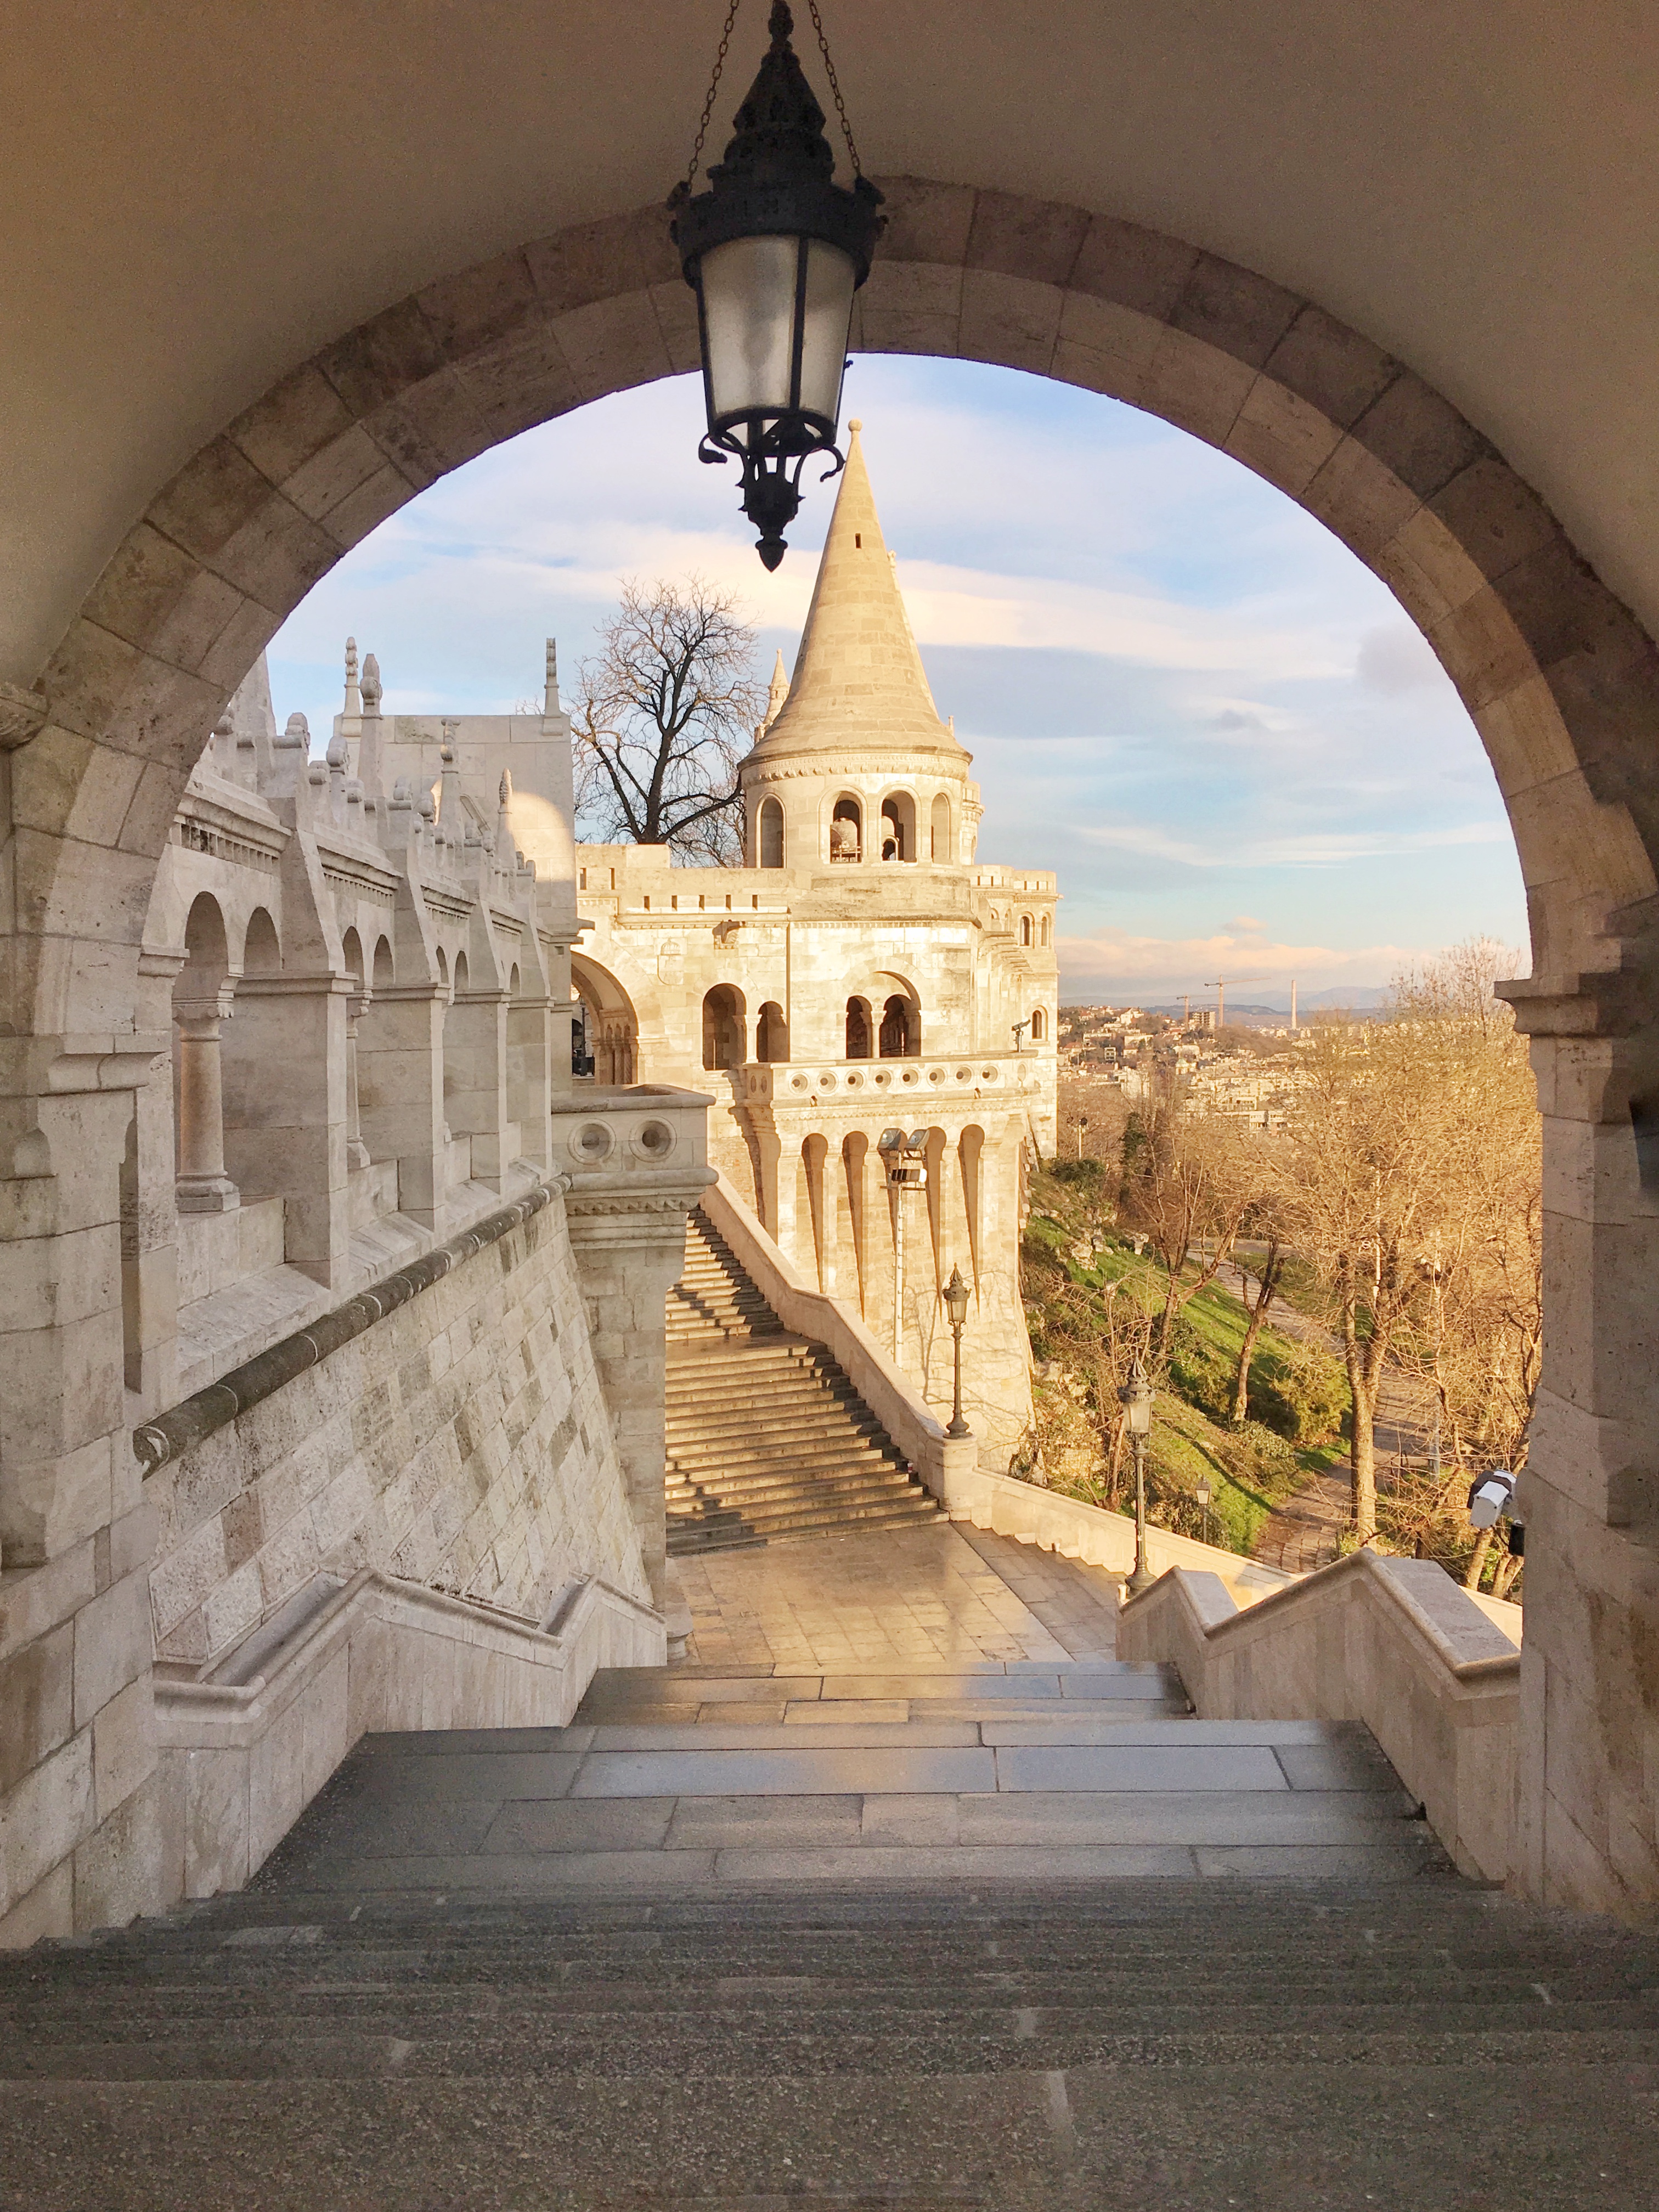 Architecture at Fisherman's Bastion in Budapest